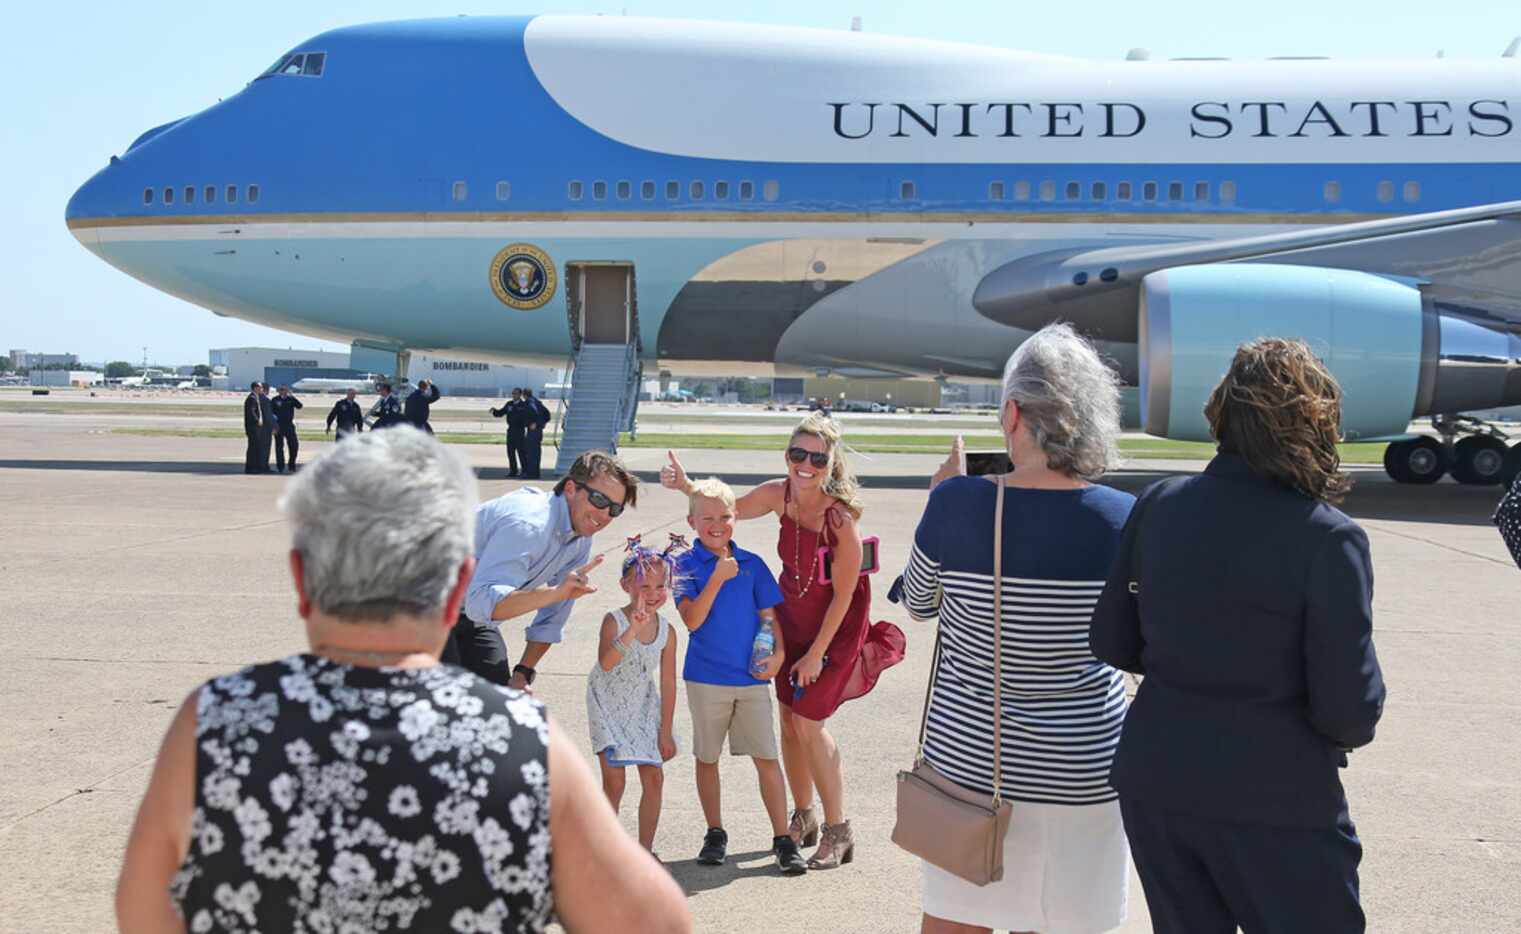 The Knutowski family from Trophy Club, Texas, poses for a photo in front of Air Force One...